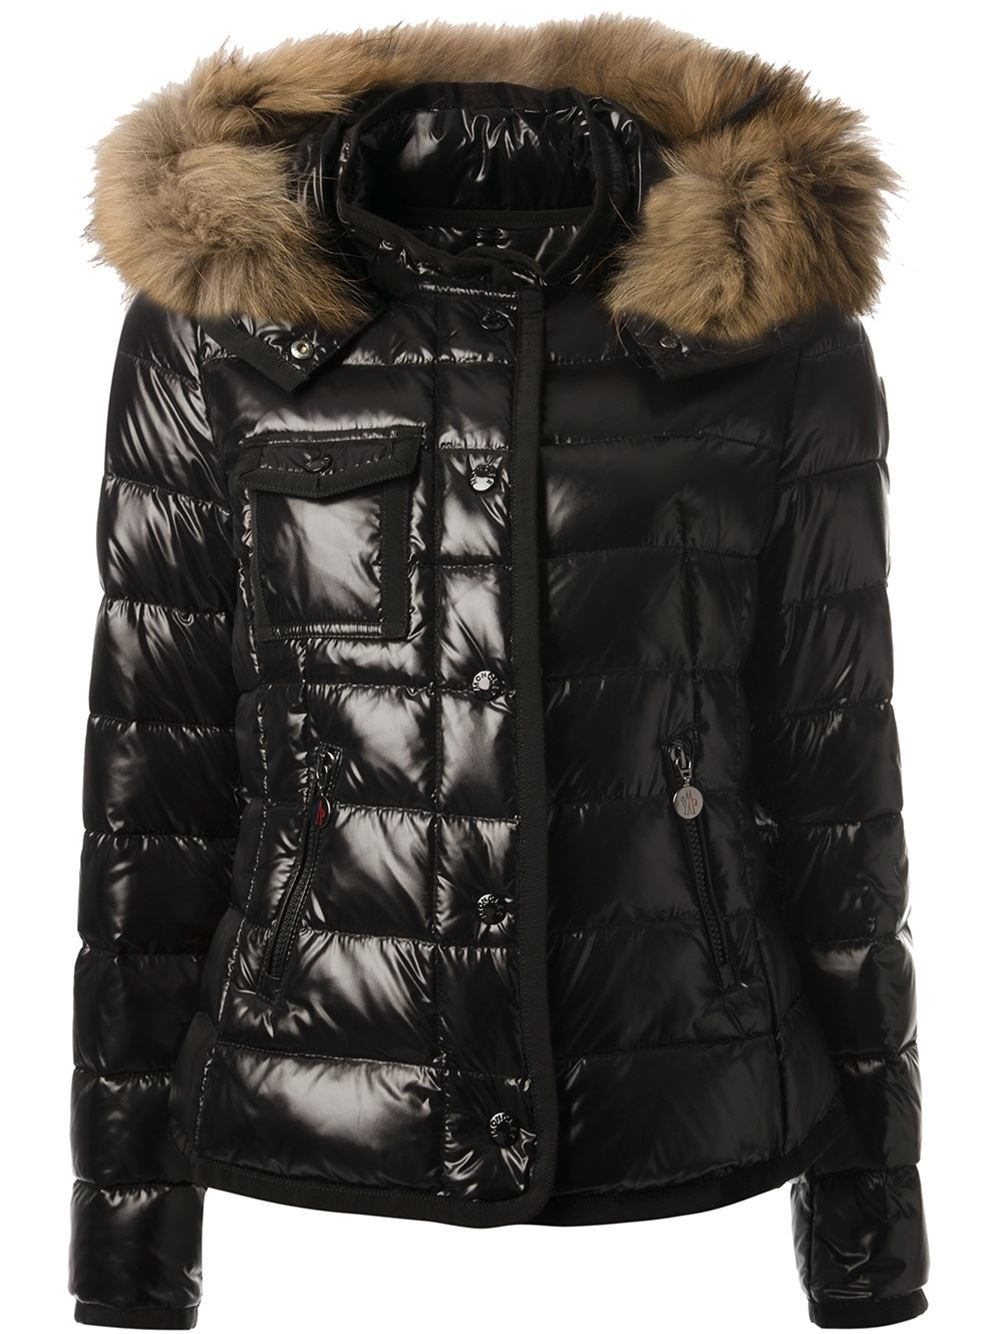 Moncler Shiny Padded Jacket in Black - Lyst